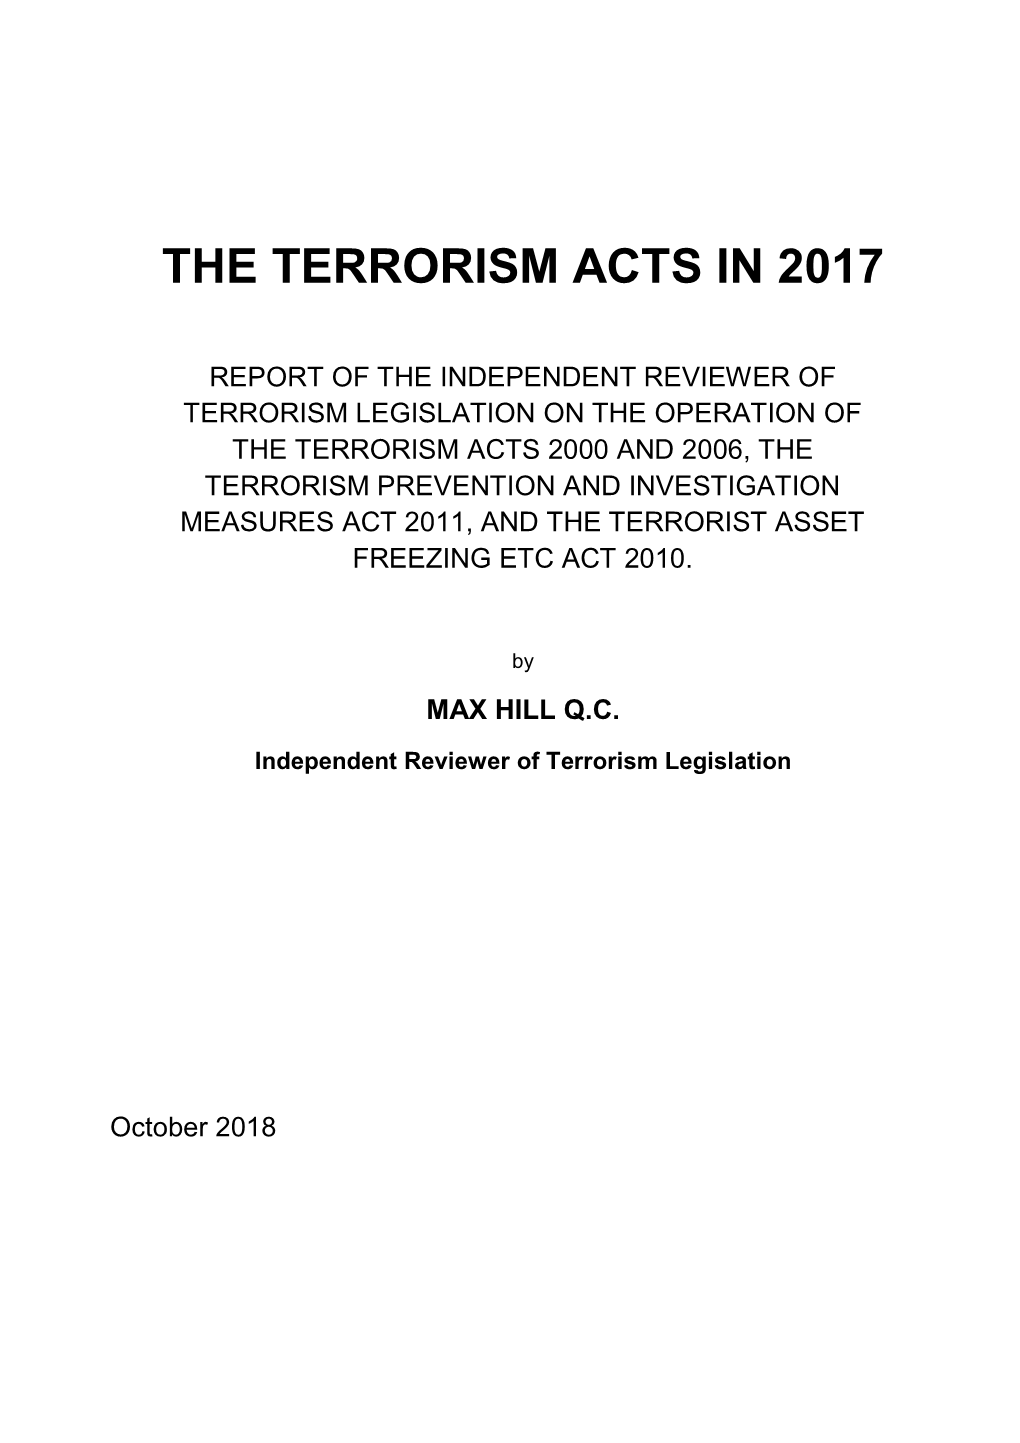 The Terrorism Acts in 2017